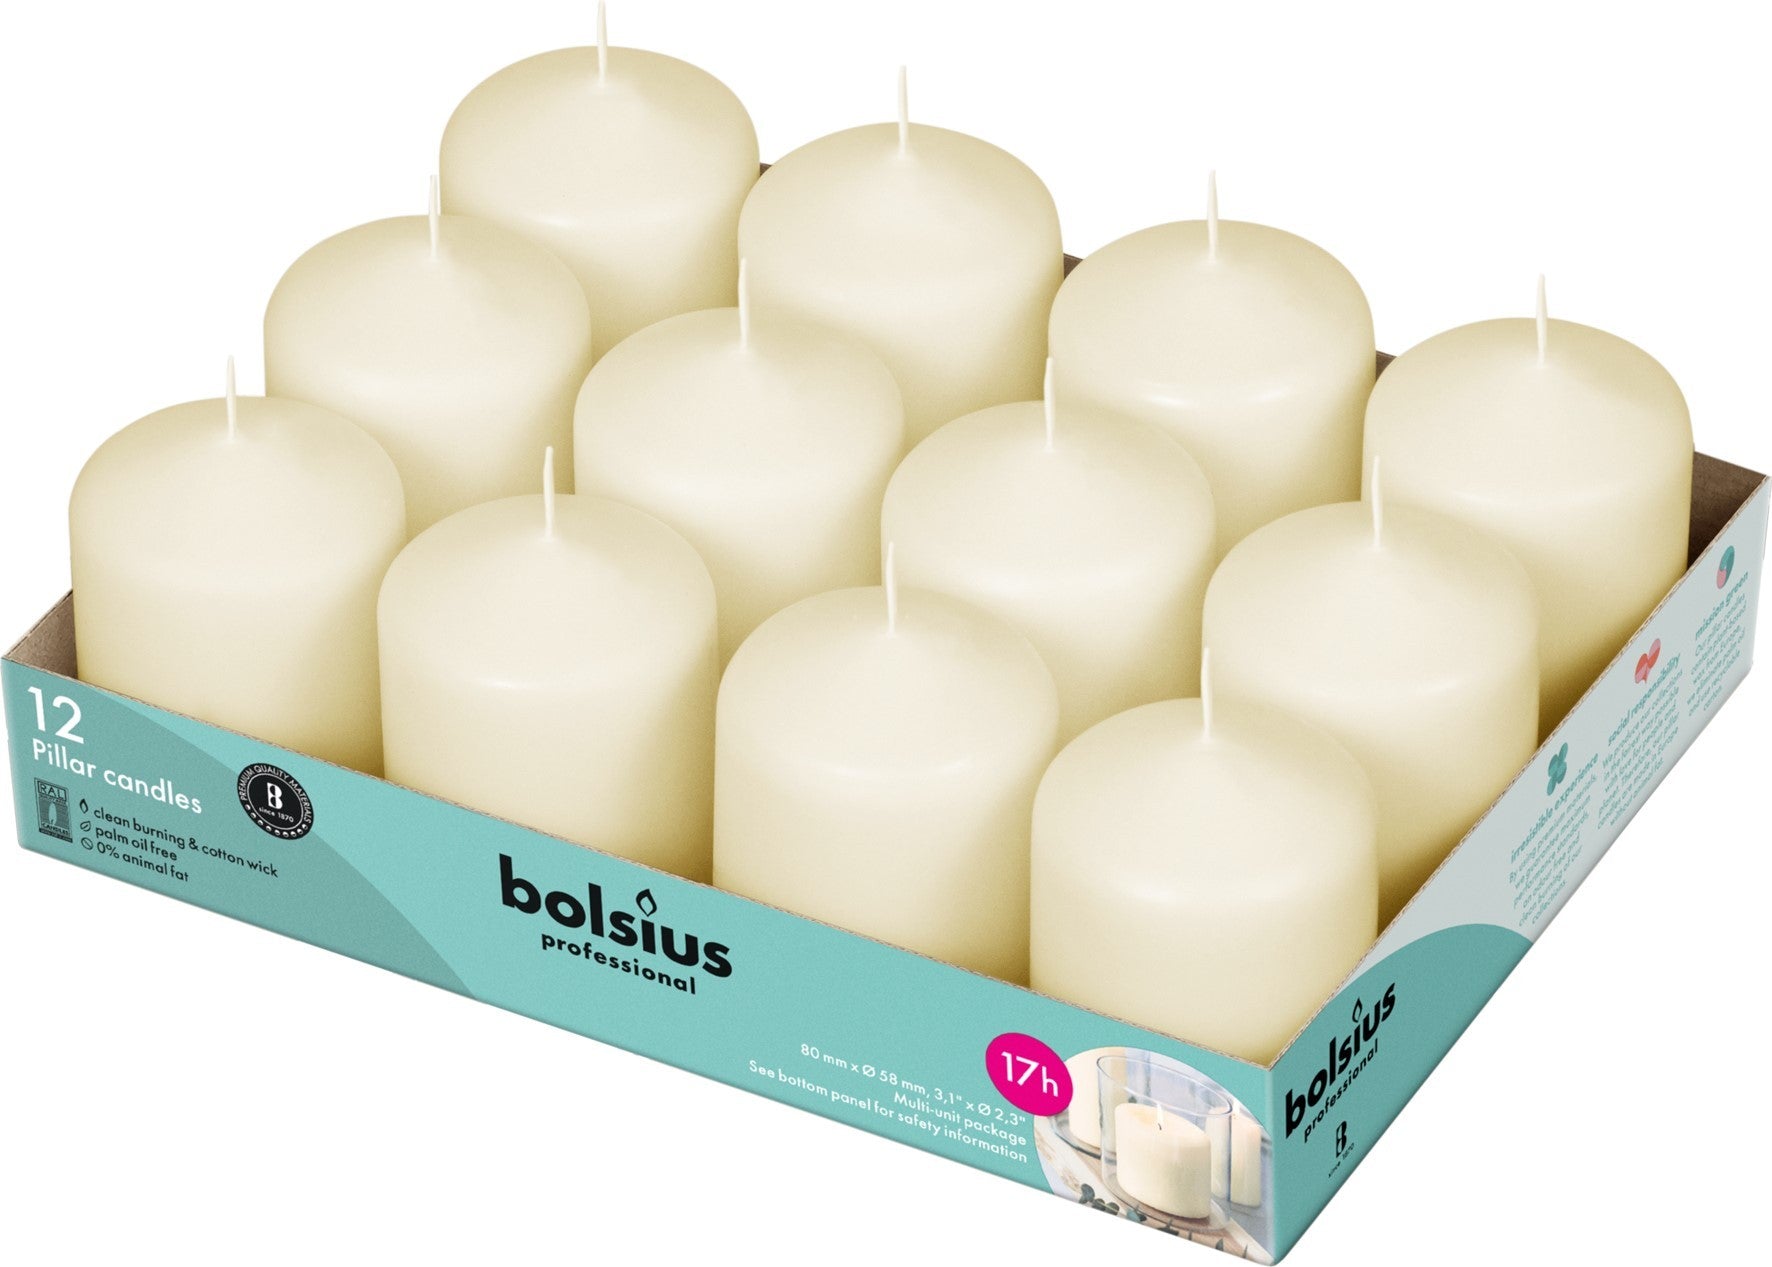 View 12 Bolsius Professional Pillar Candle Ivory 7858mm information